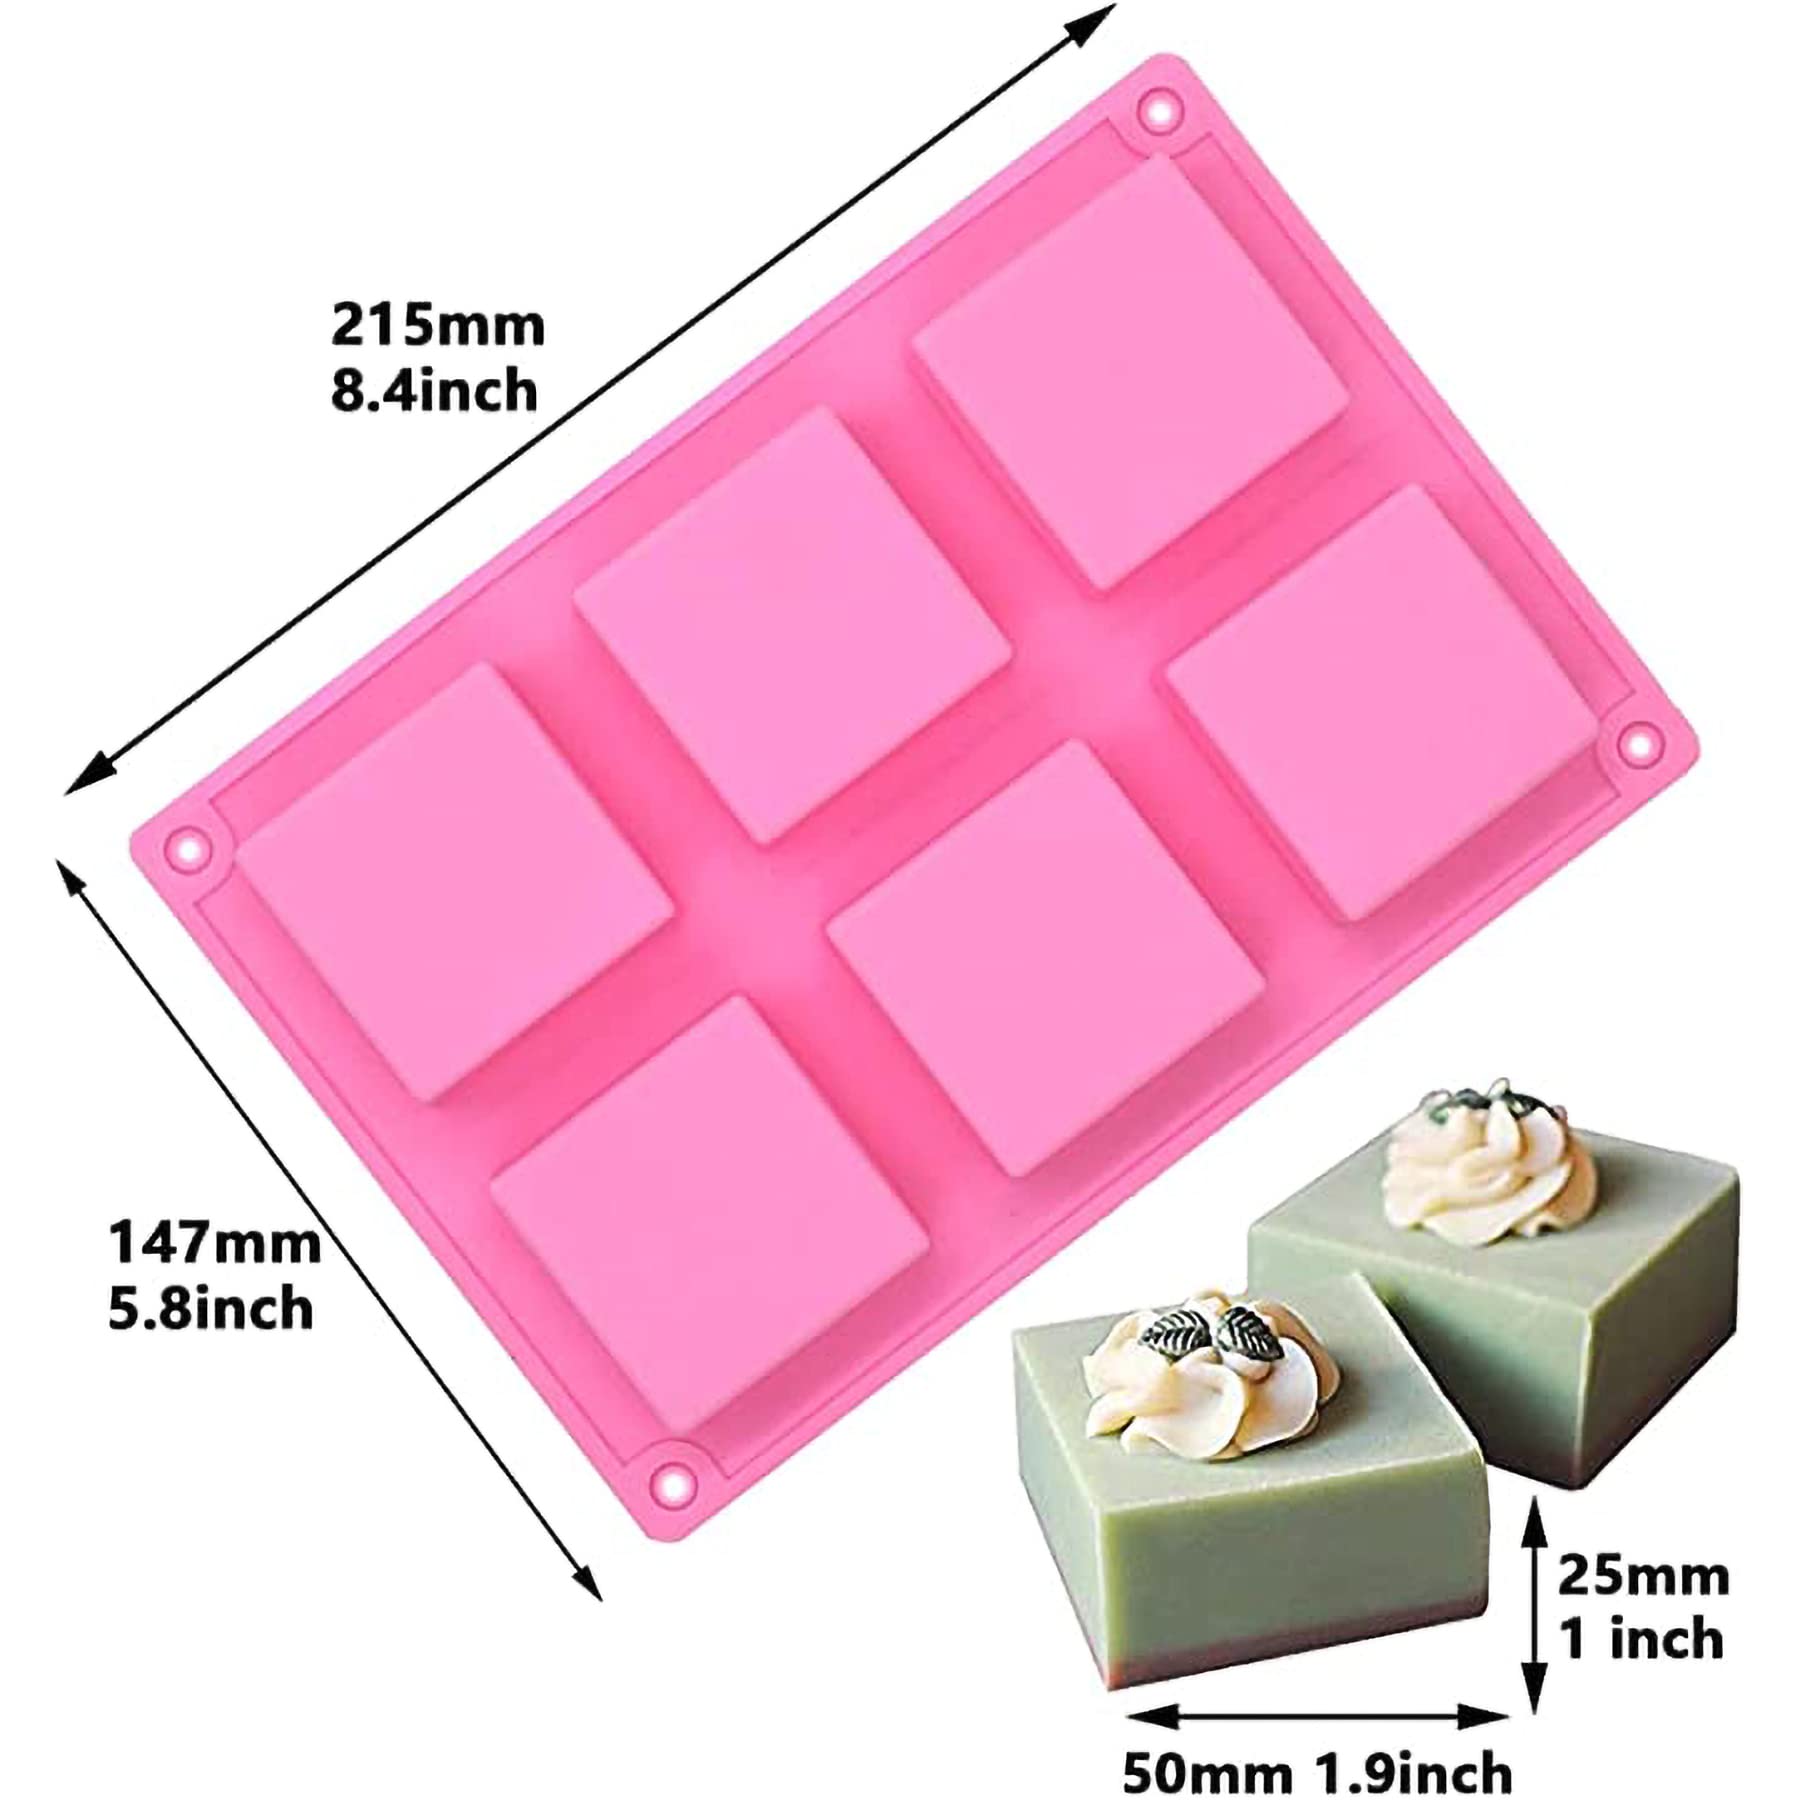 Funshowcase 6-Cavity Square Baking Silicone Mold for Cake Teacake Chocolate Desserts Cheesecake Cornbread Brownie Blancmange Pudding Soap Candle Making Resin Epoxy Casting Crafting Projects 2-in-set